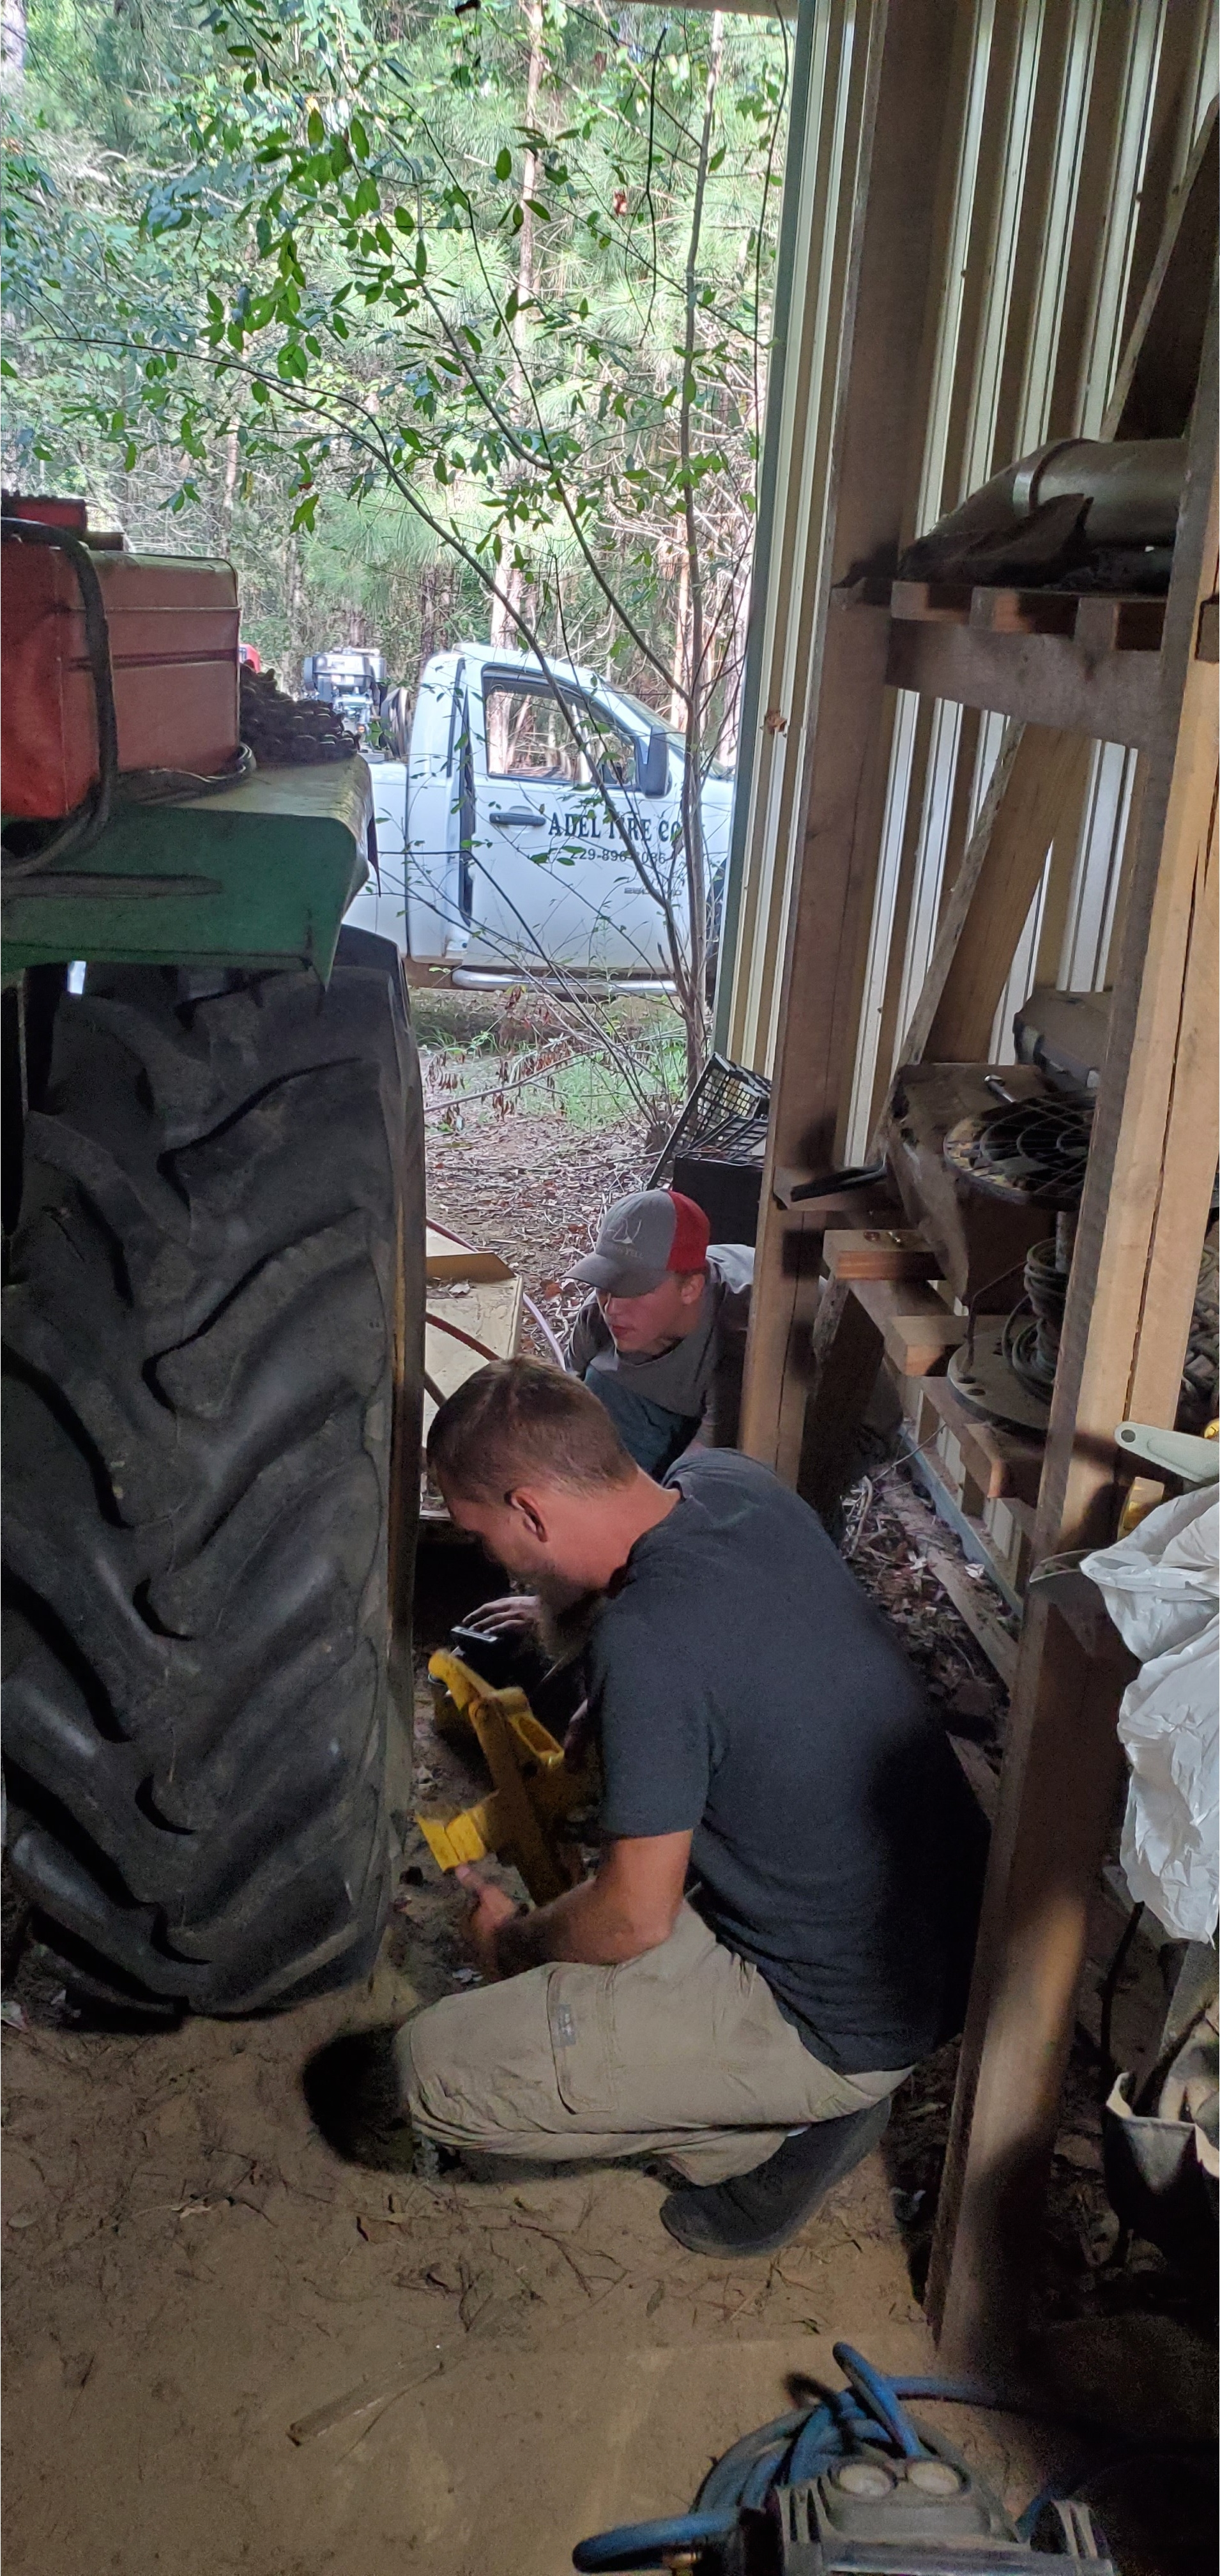 Fixing tractor tire